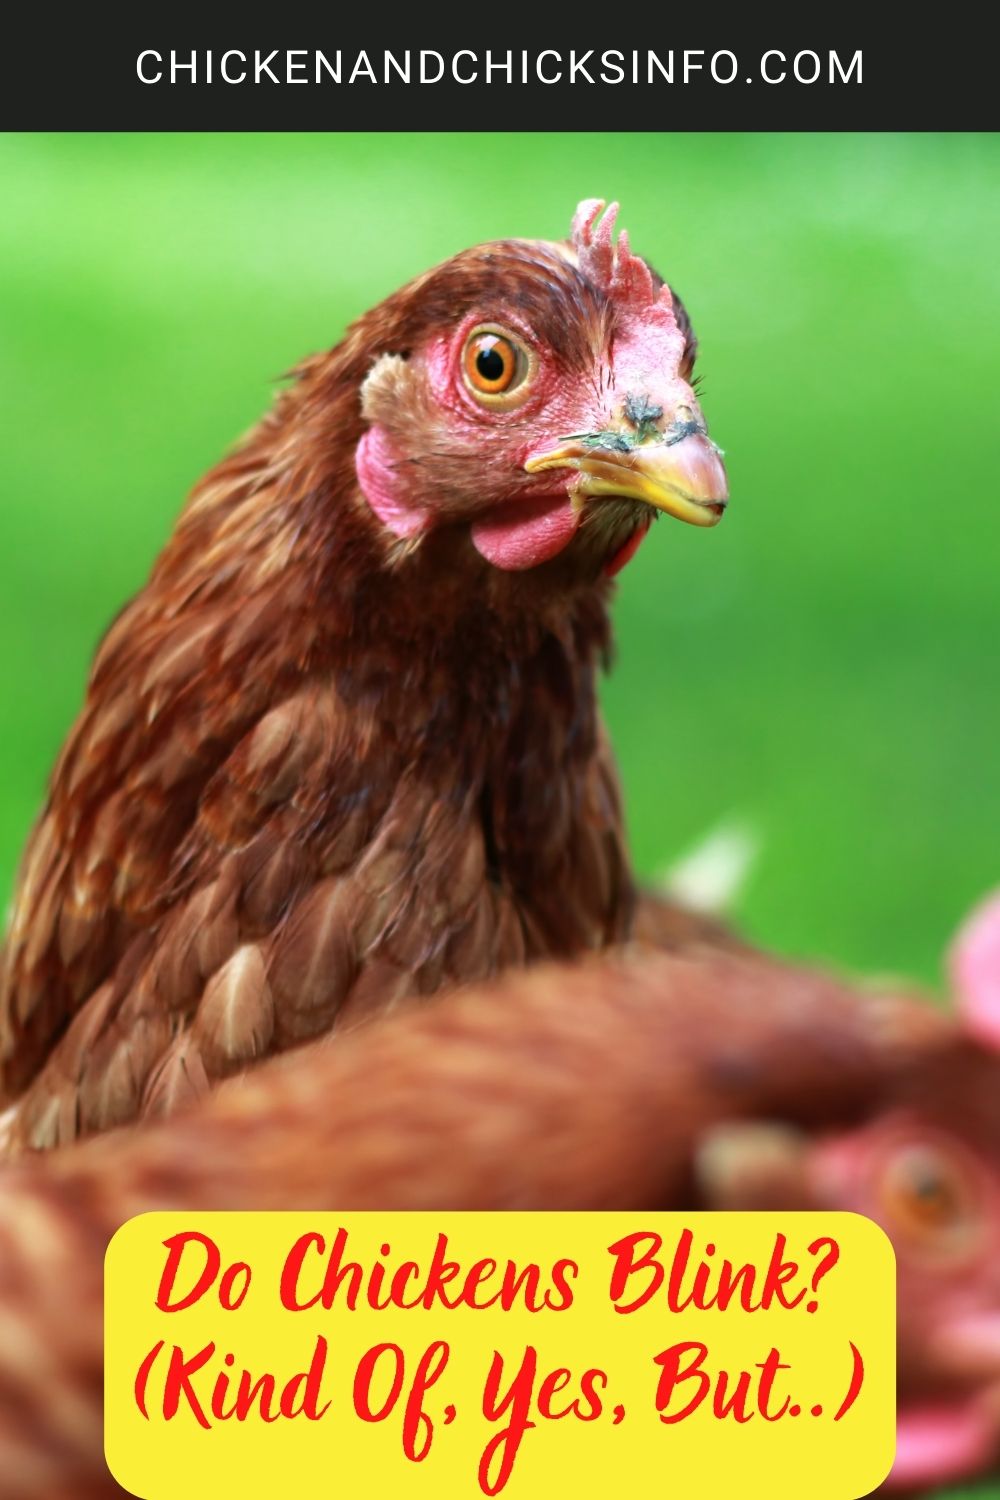 Do Chickens Blink? (Kind Of, Yes, But..) poster.
